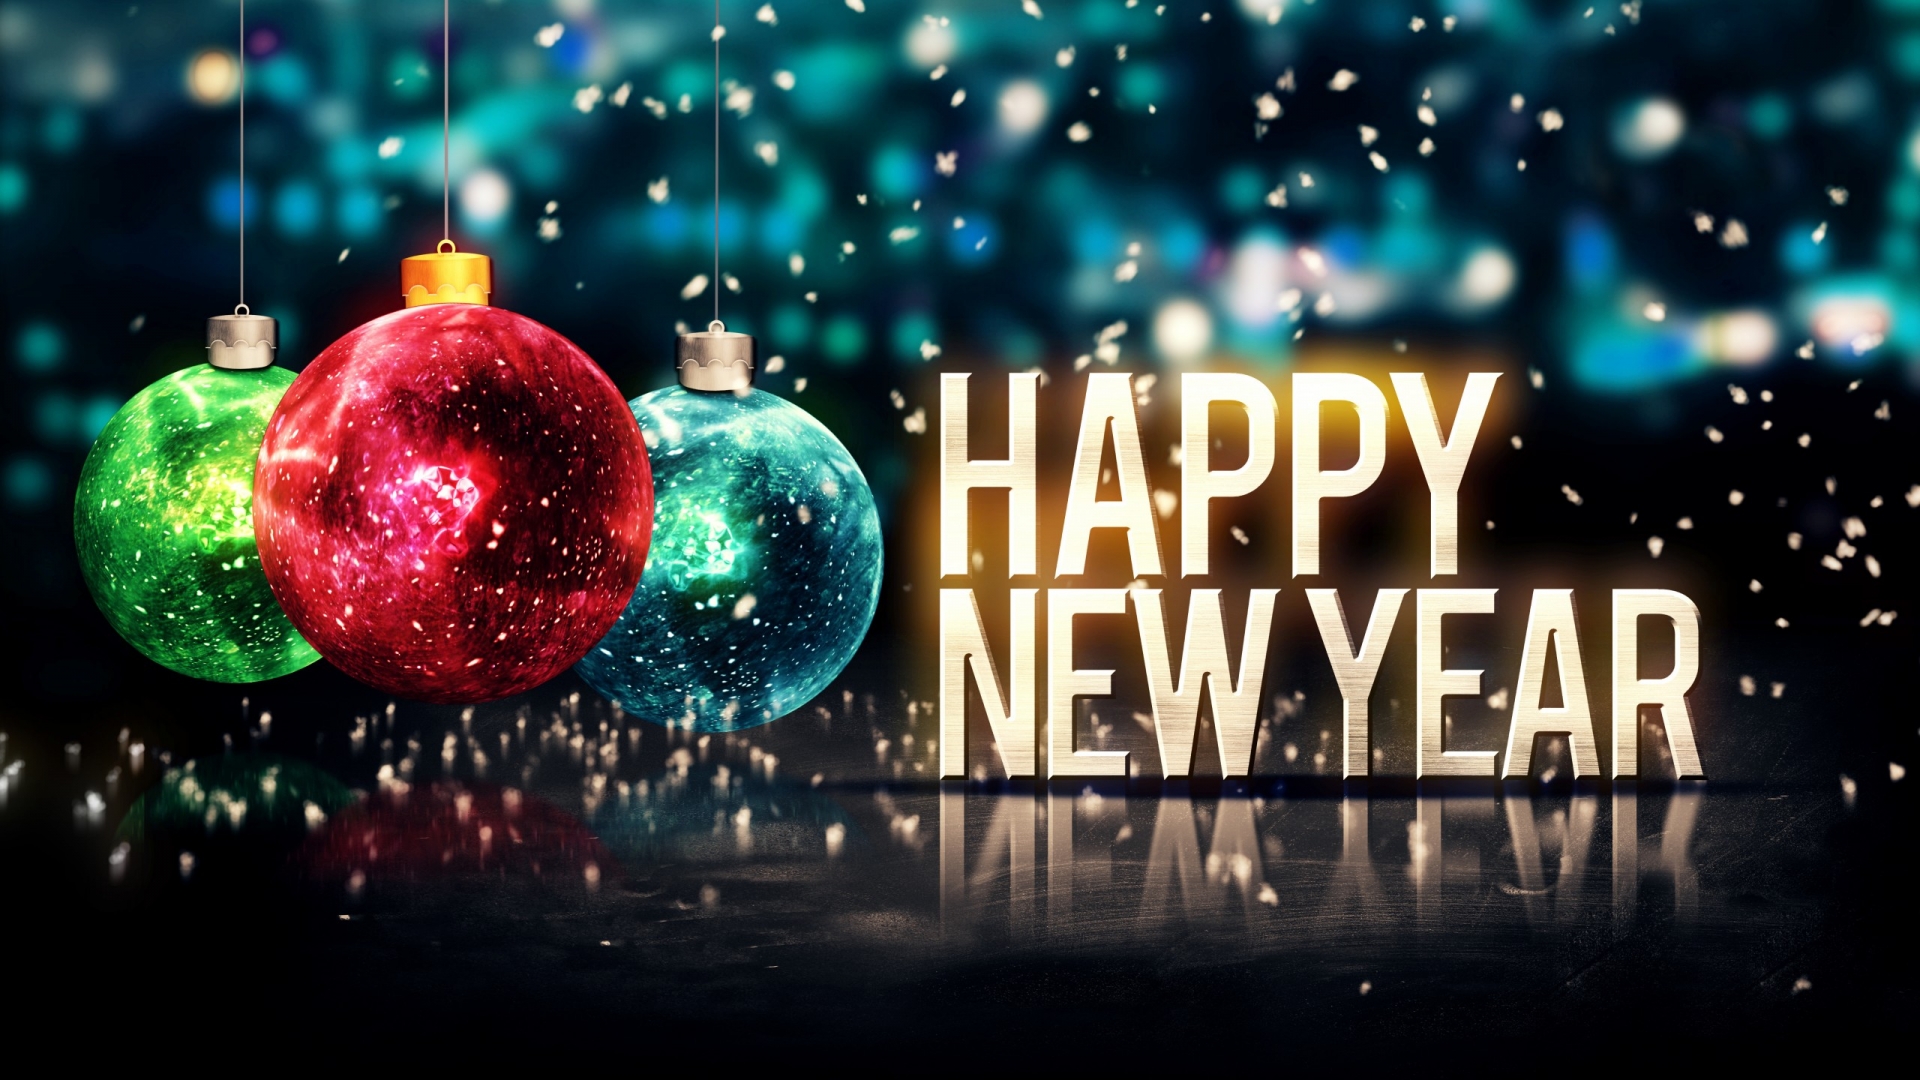 Happy New Year Ornament for 1920 x 1080 HDTV 1080p resolution